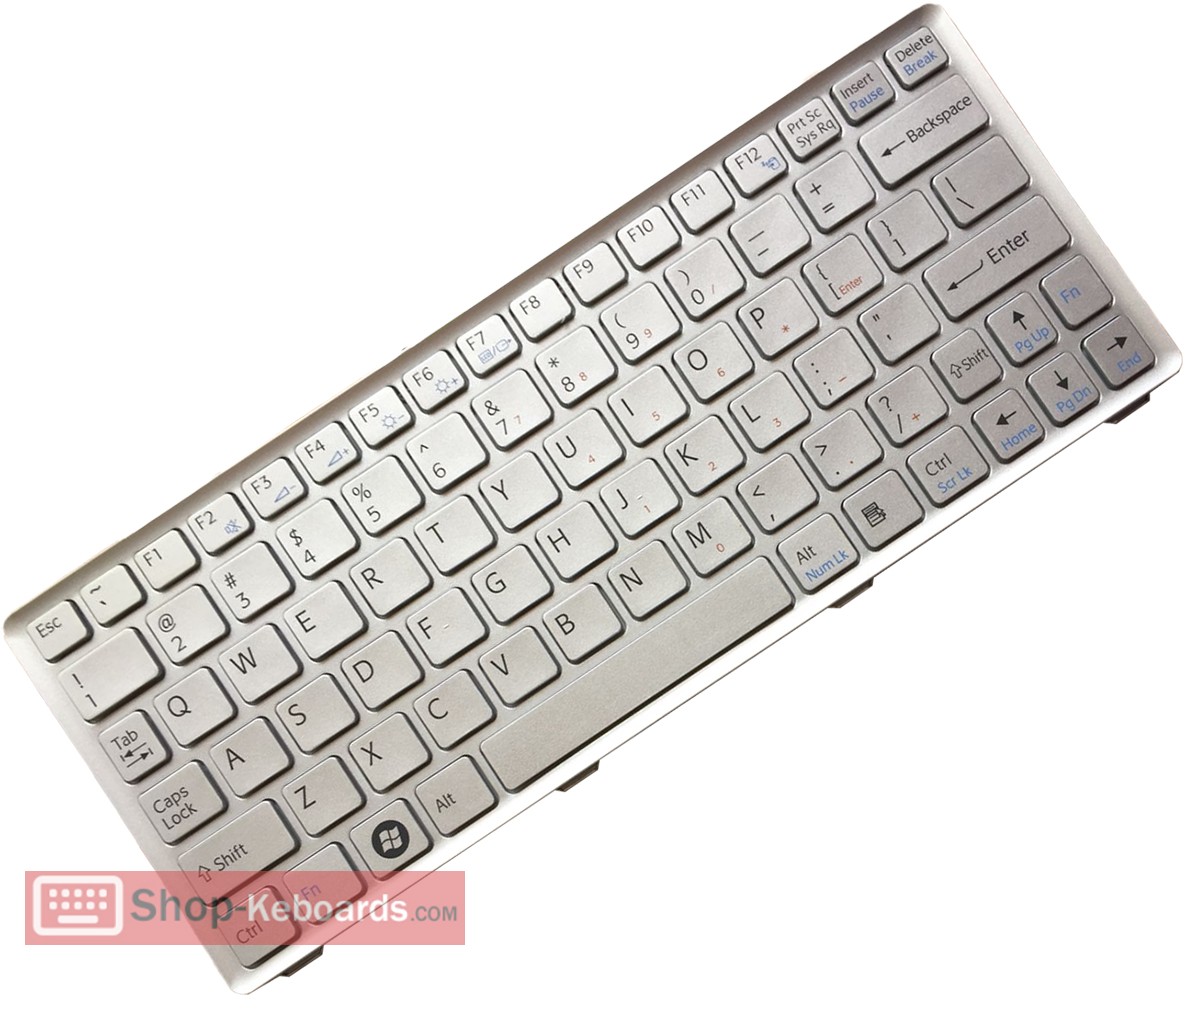 Sony Vaio VPC-W12S1E Keyboard replacement